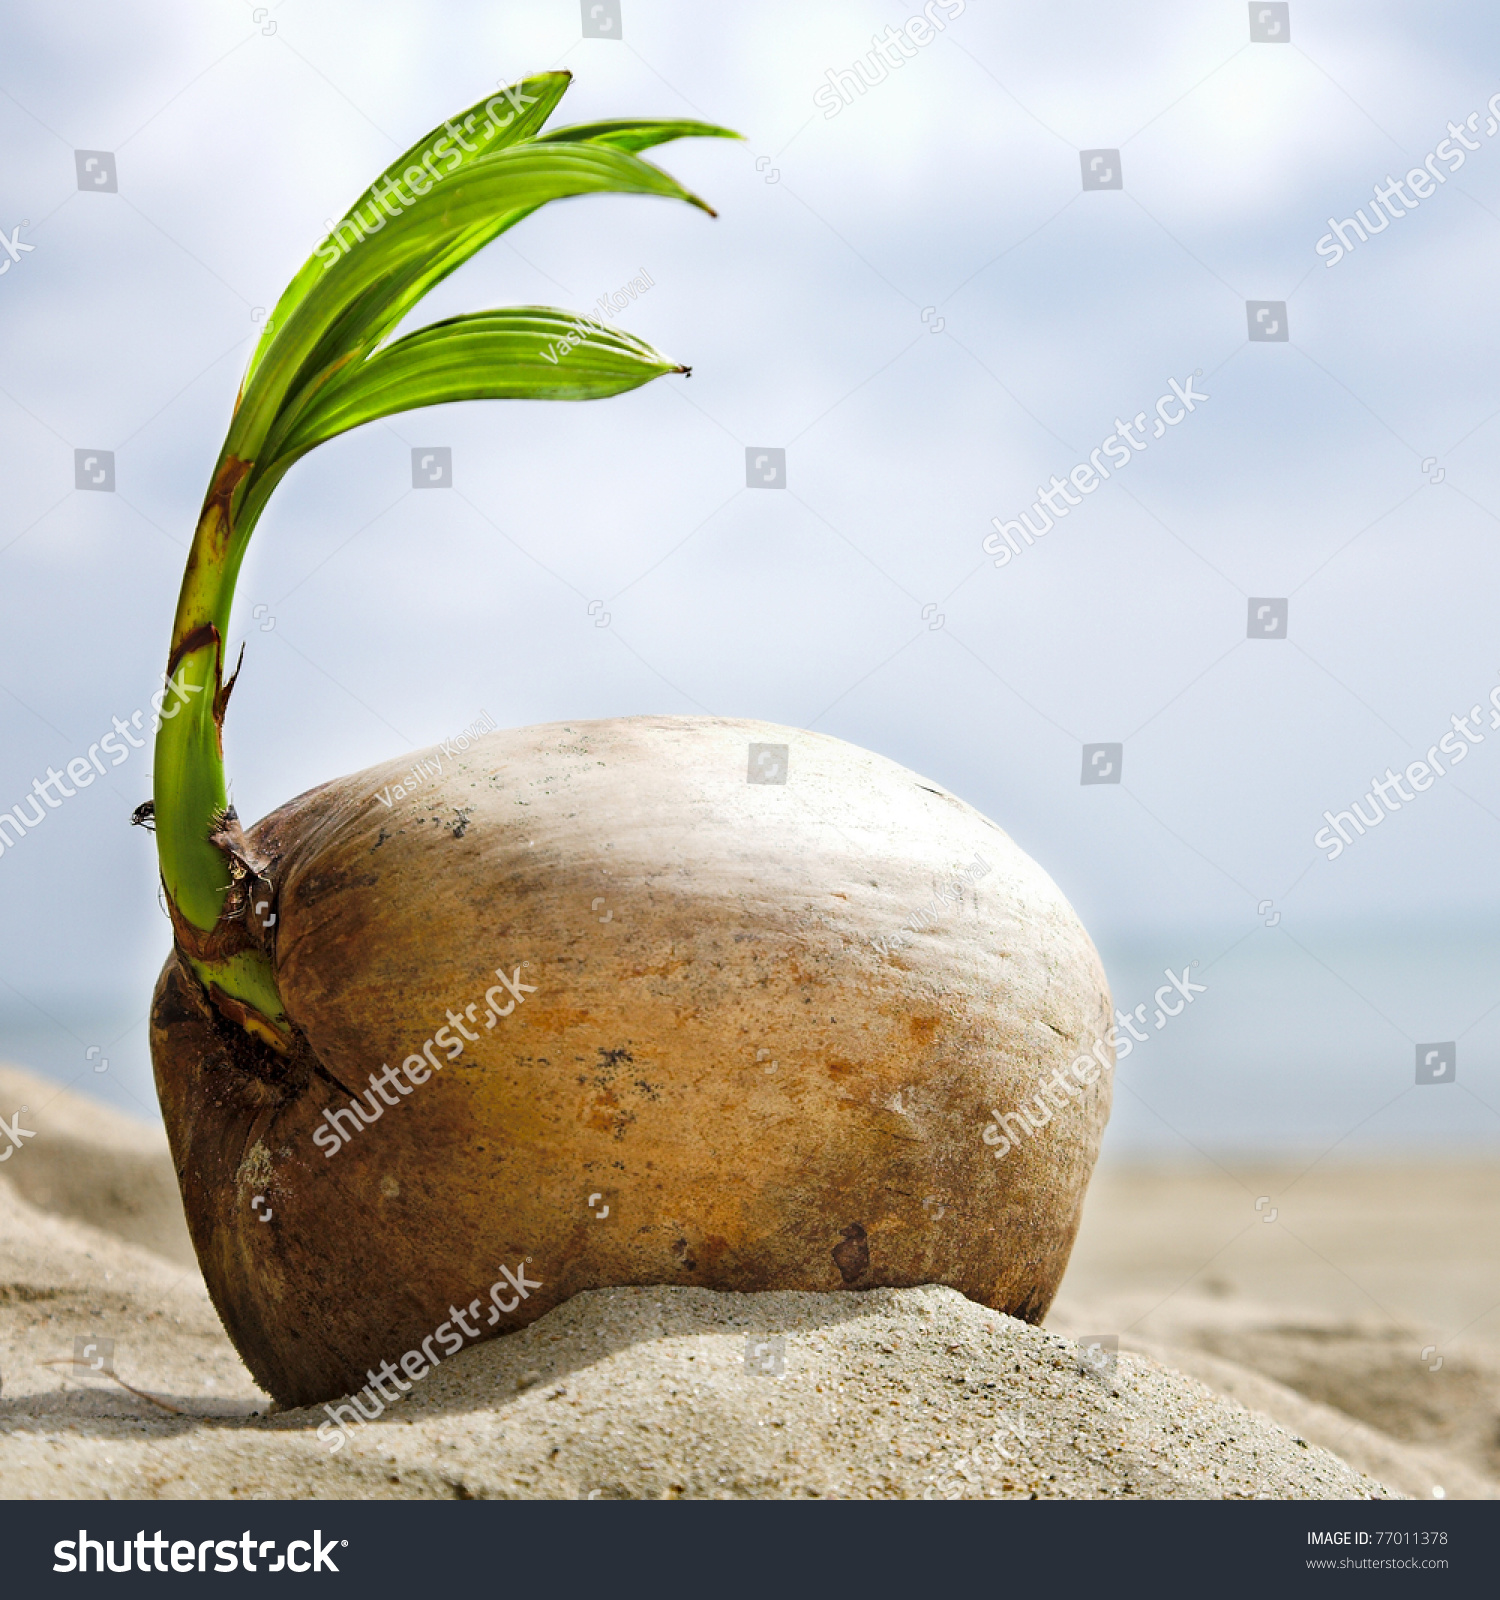 Coconut Sprout On Tropical Sea Beach Stock Photo 77011378 - Shutterstock